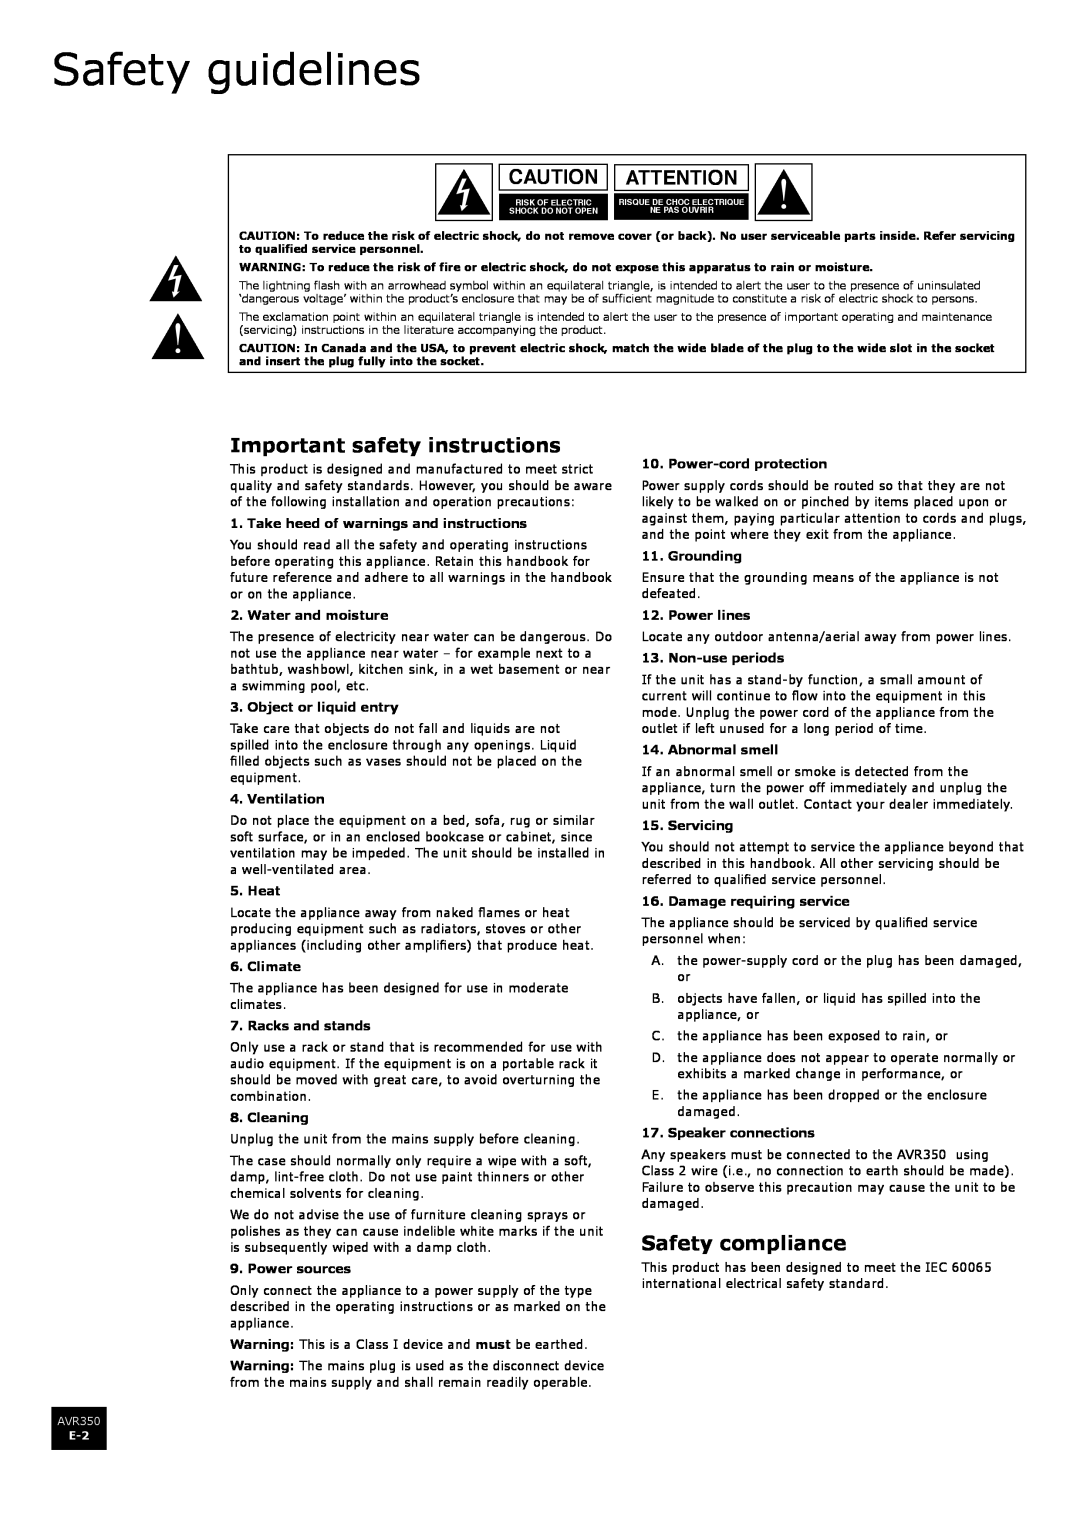 Arcam AVR350 Safety guidelines, Important safety instructions, Safety compliance, Take heed of warnings and instructions 